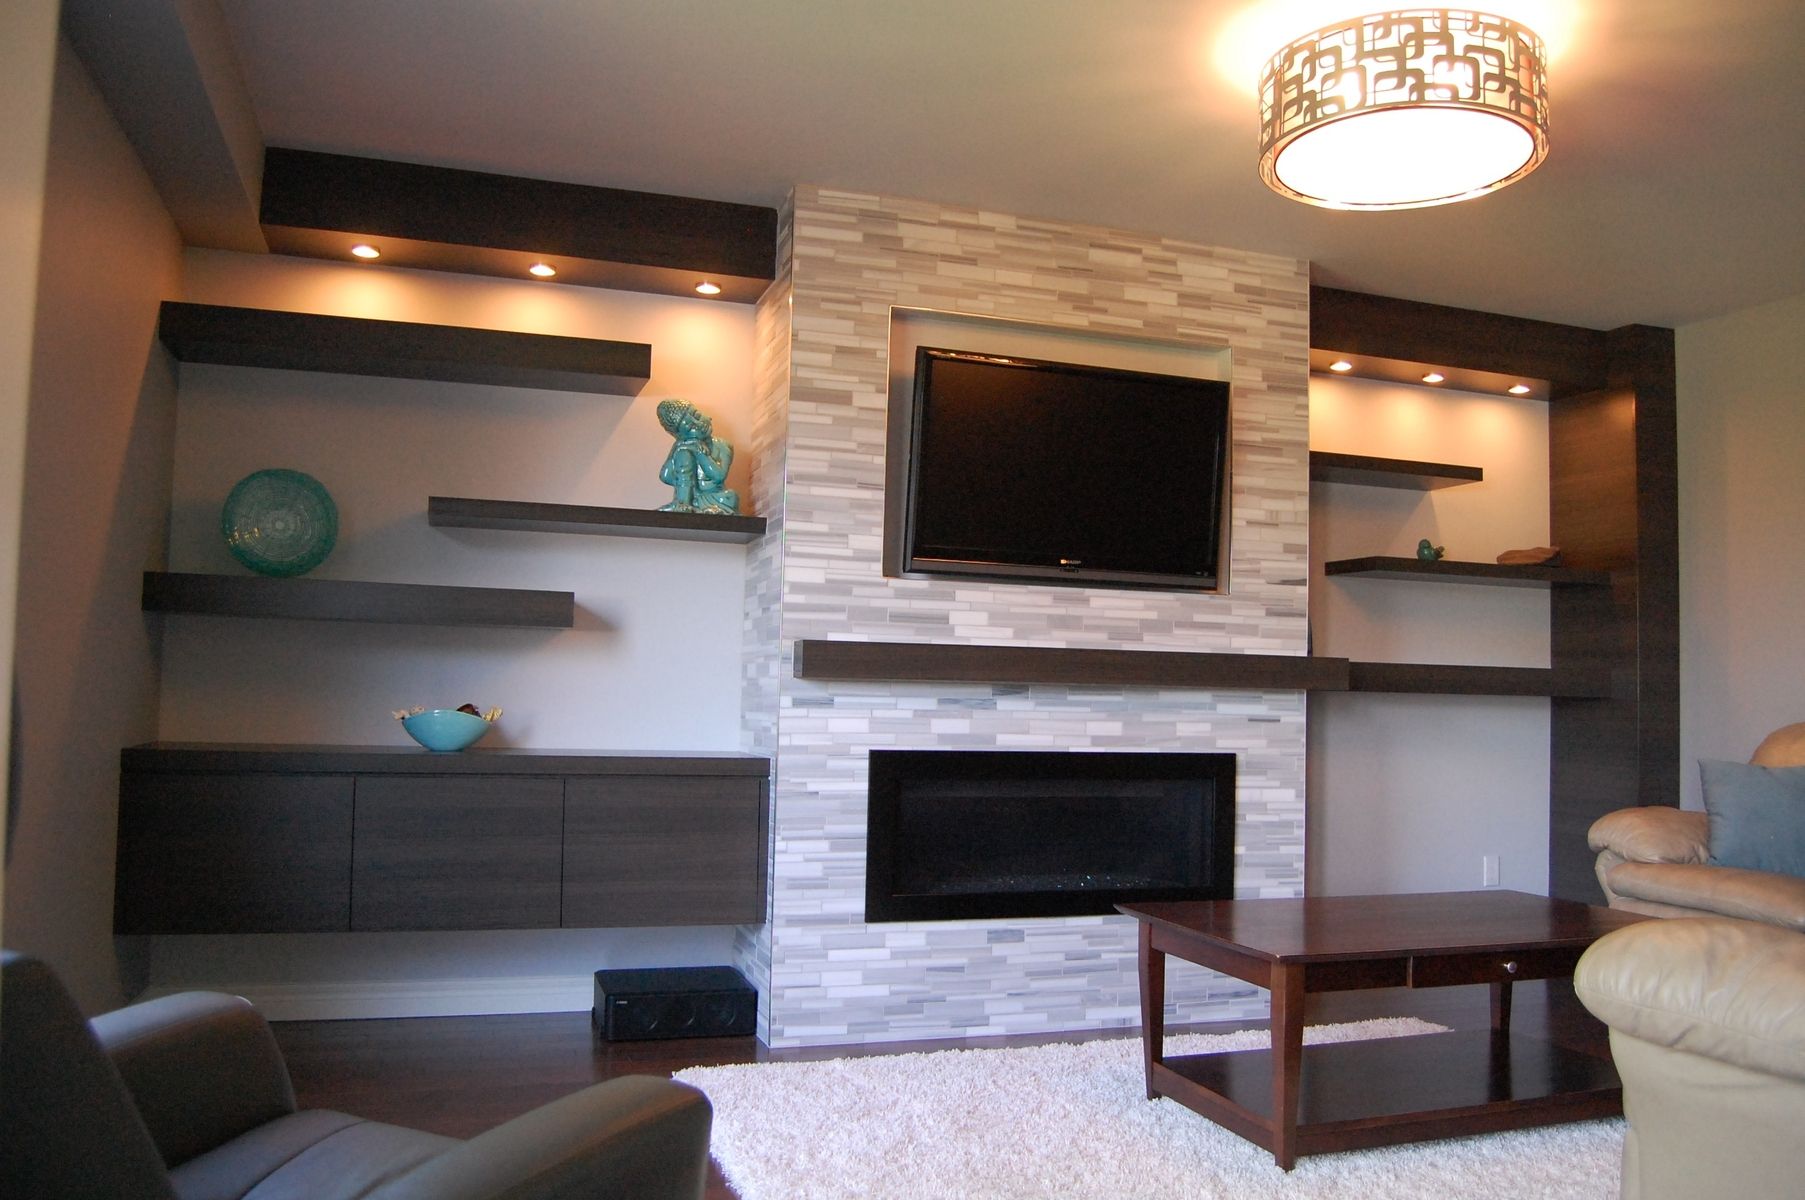 Electric Fireplace Wall Units Entertainment Center Fresh Custom Modern Wall Unit Made Pletely From A Printed